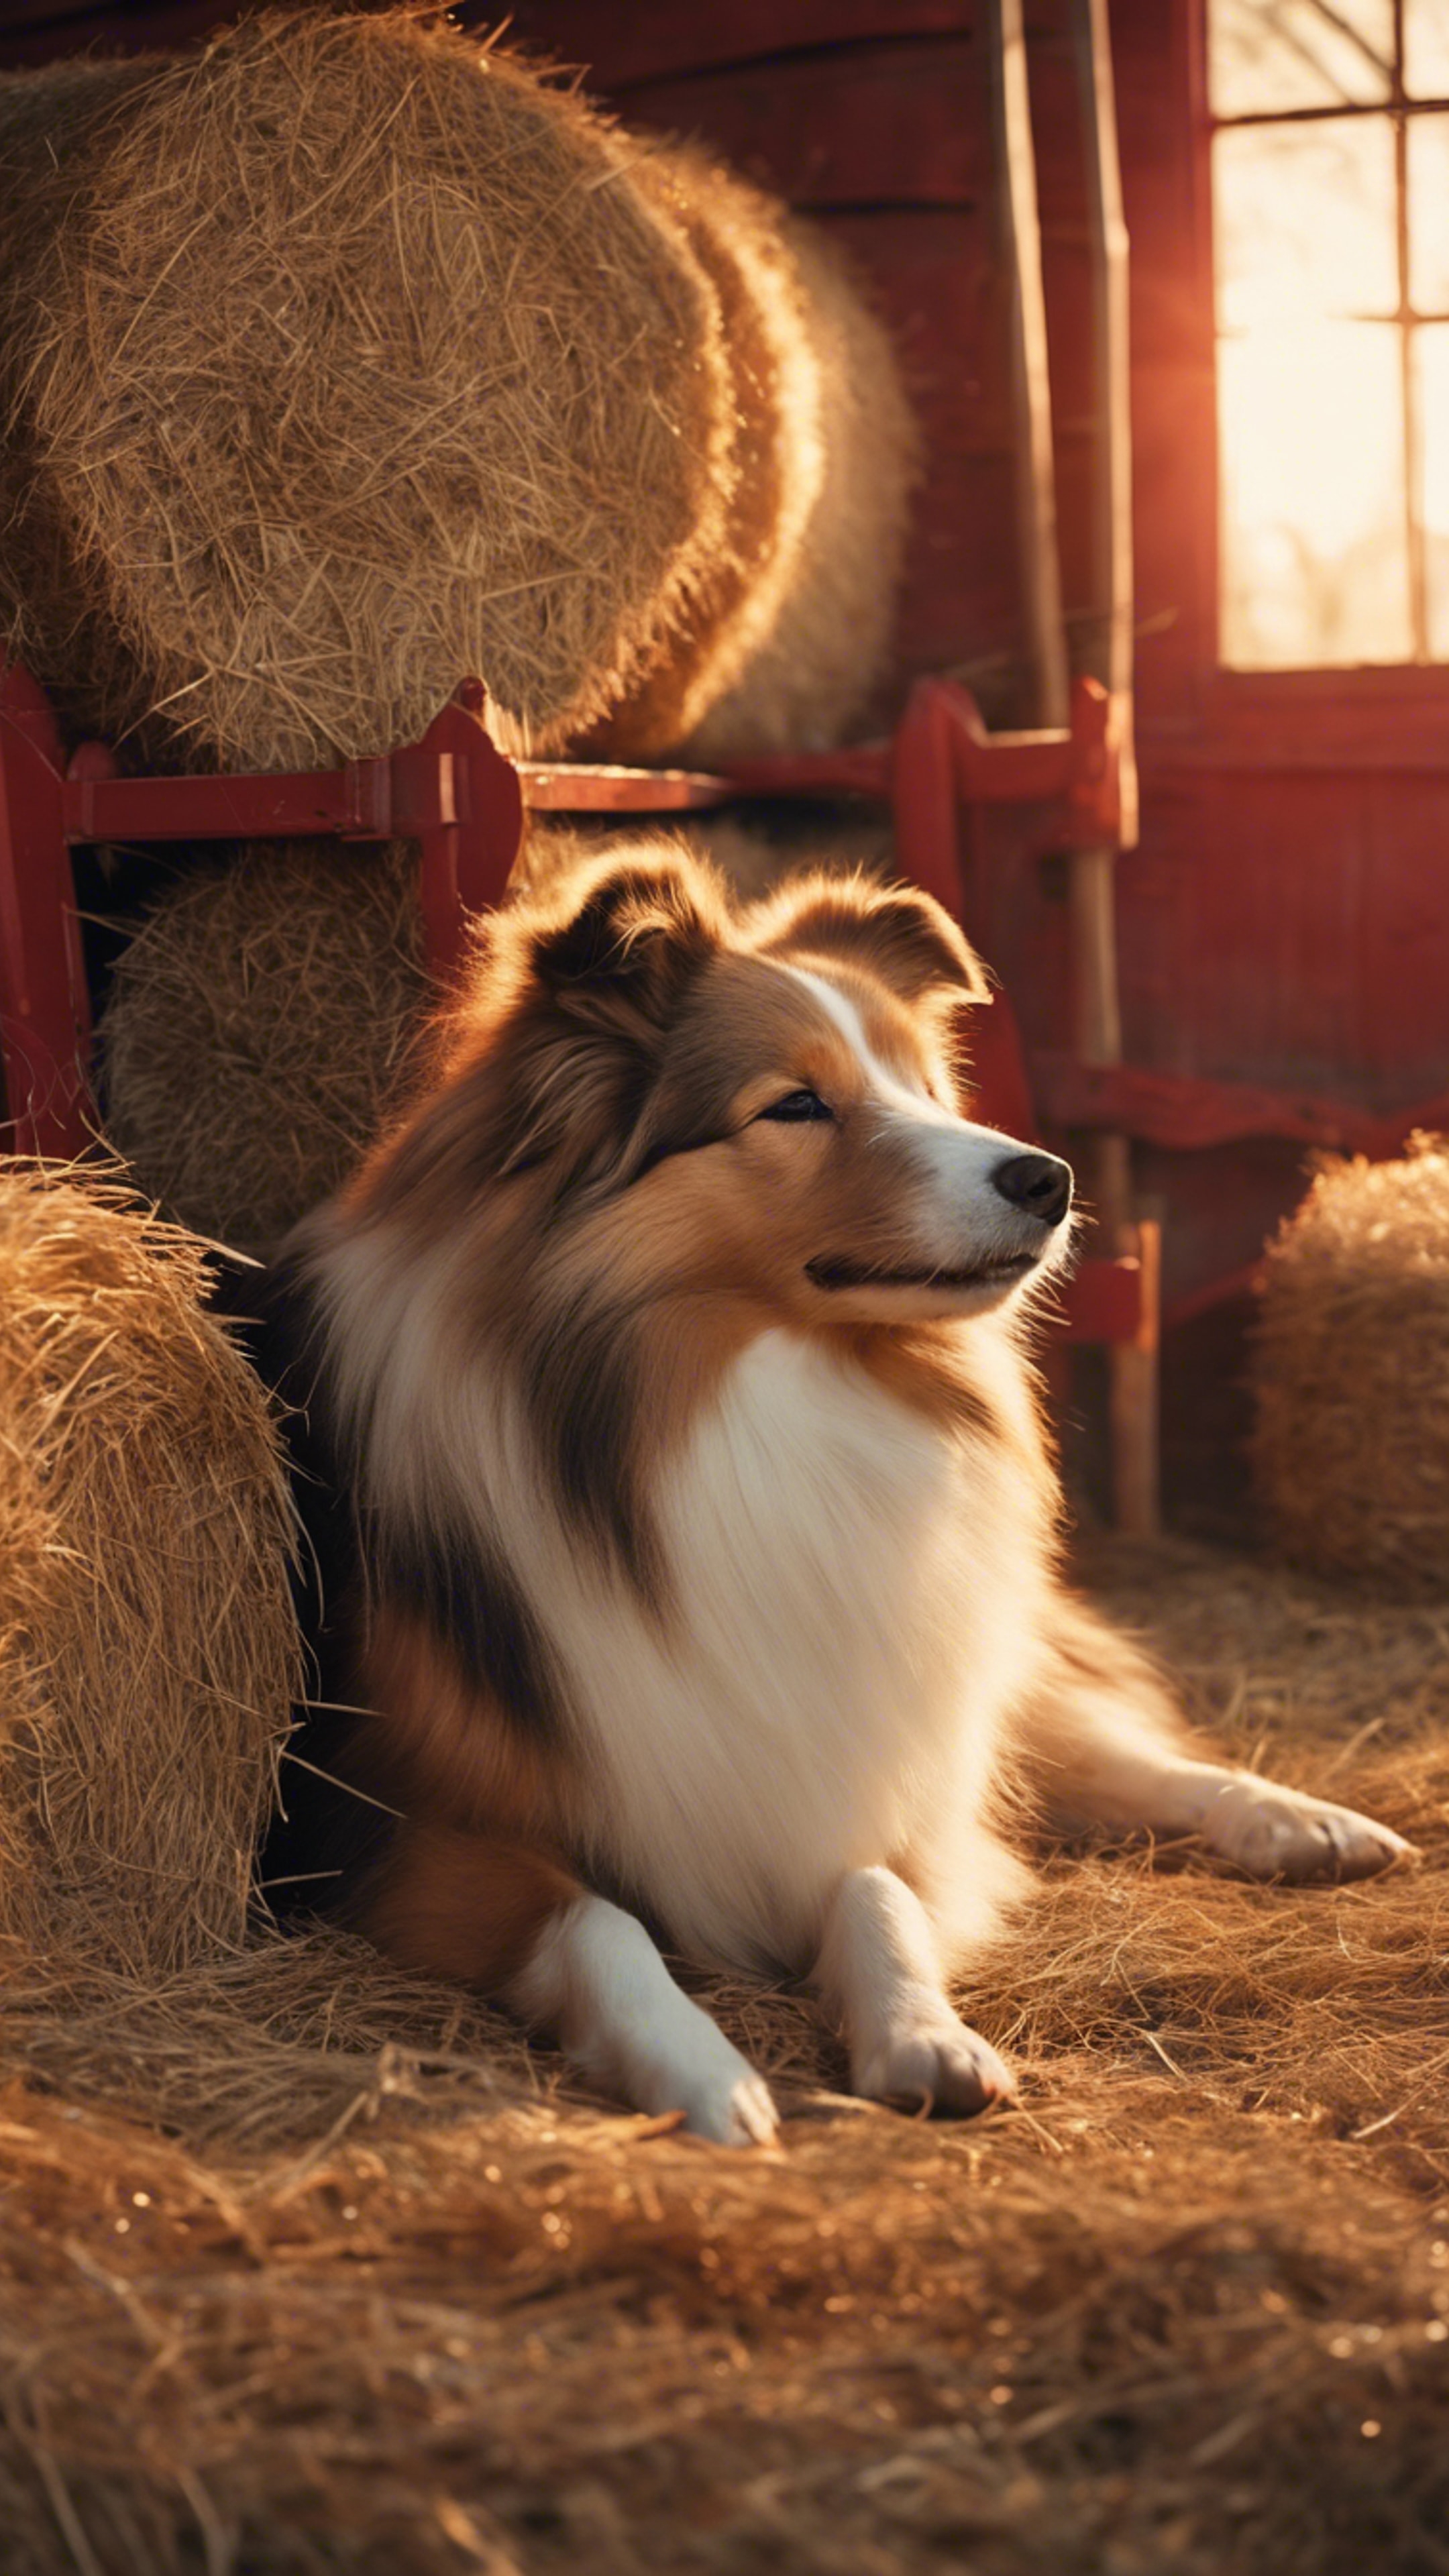 A Shetland Sheepdog sleeping in a vintage red barn, surrounded by hay balls and a setting sun. 墙纸[4b8e09167f2043c5830e]